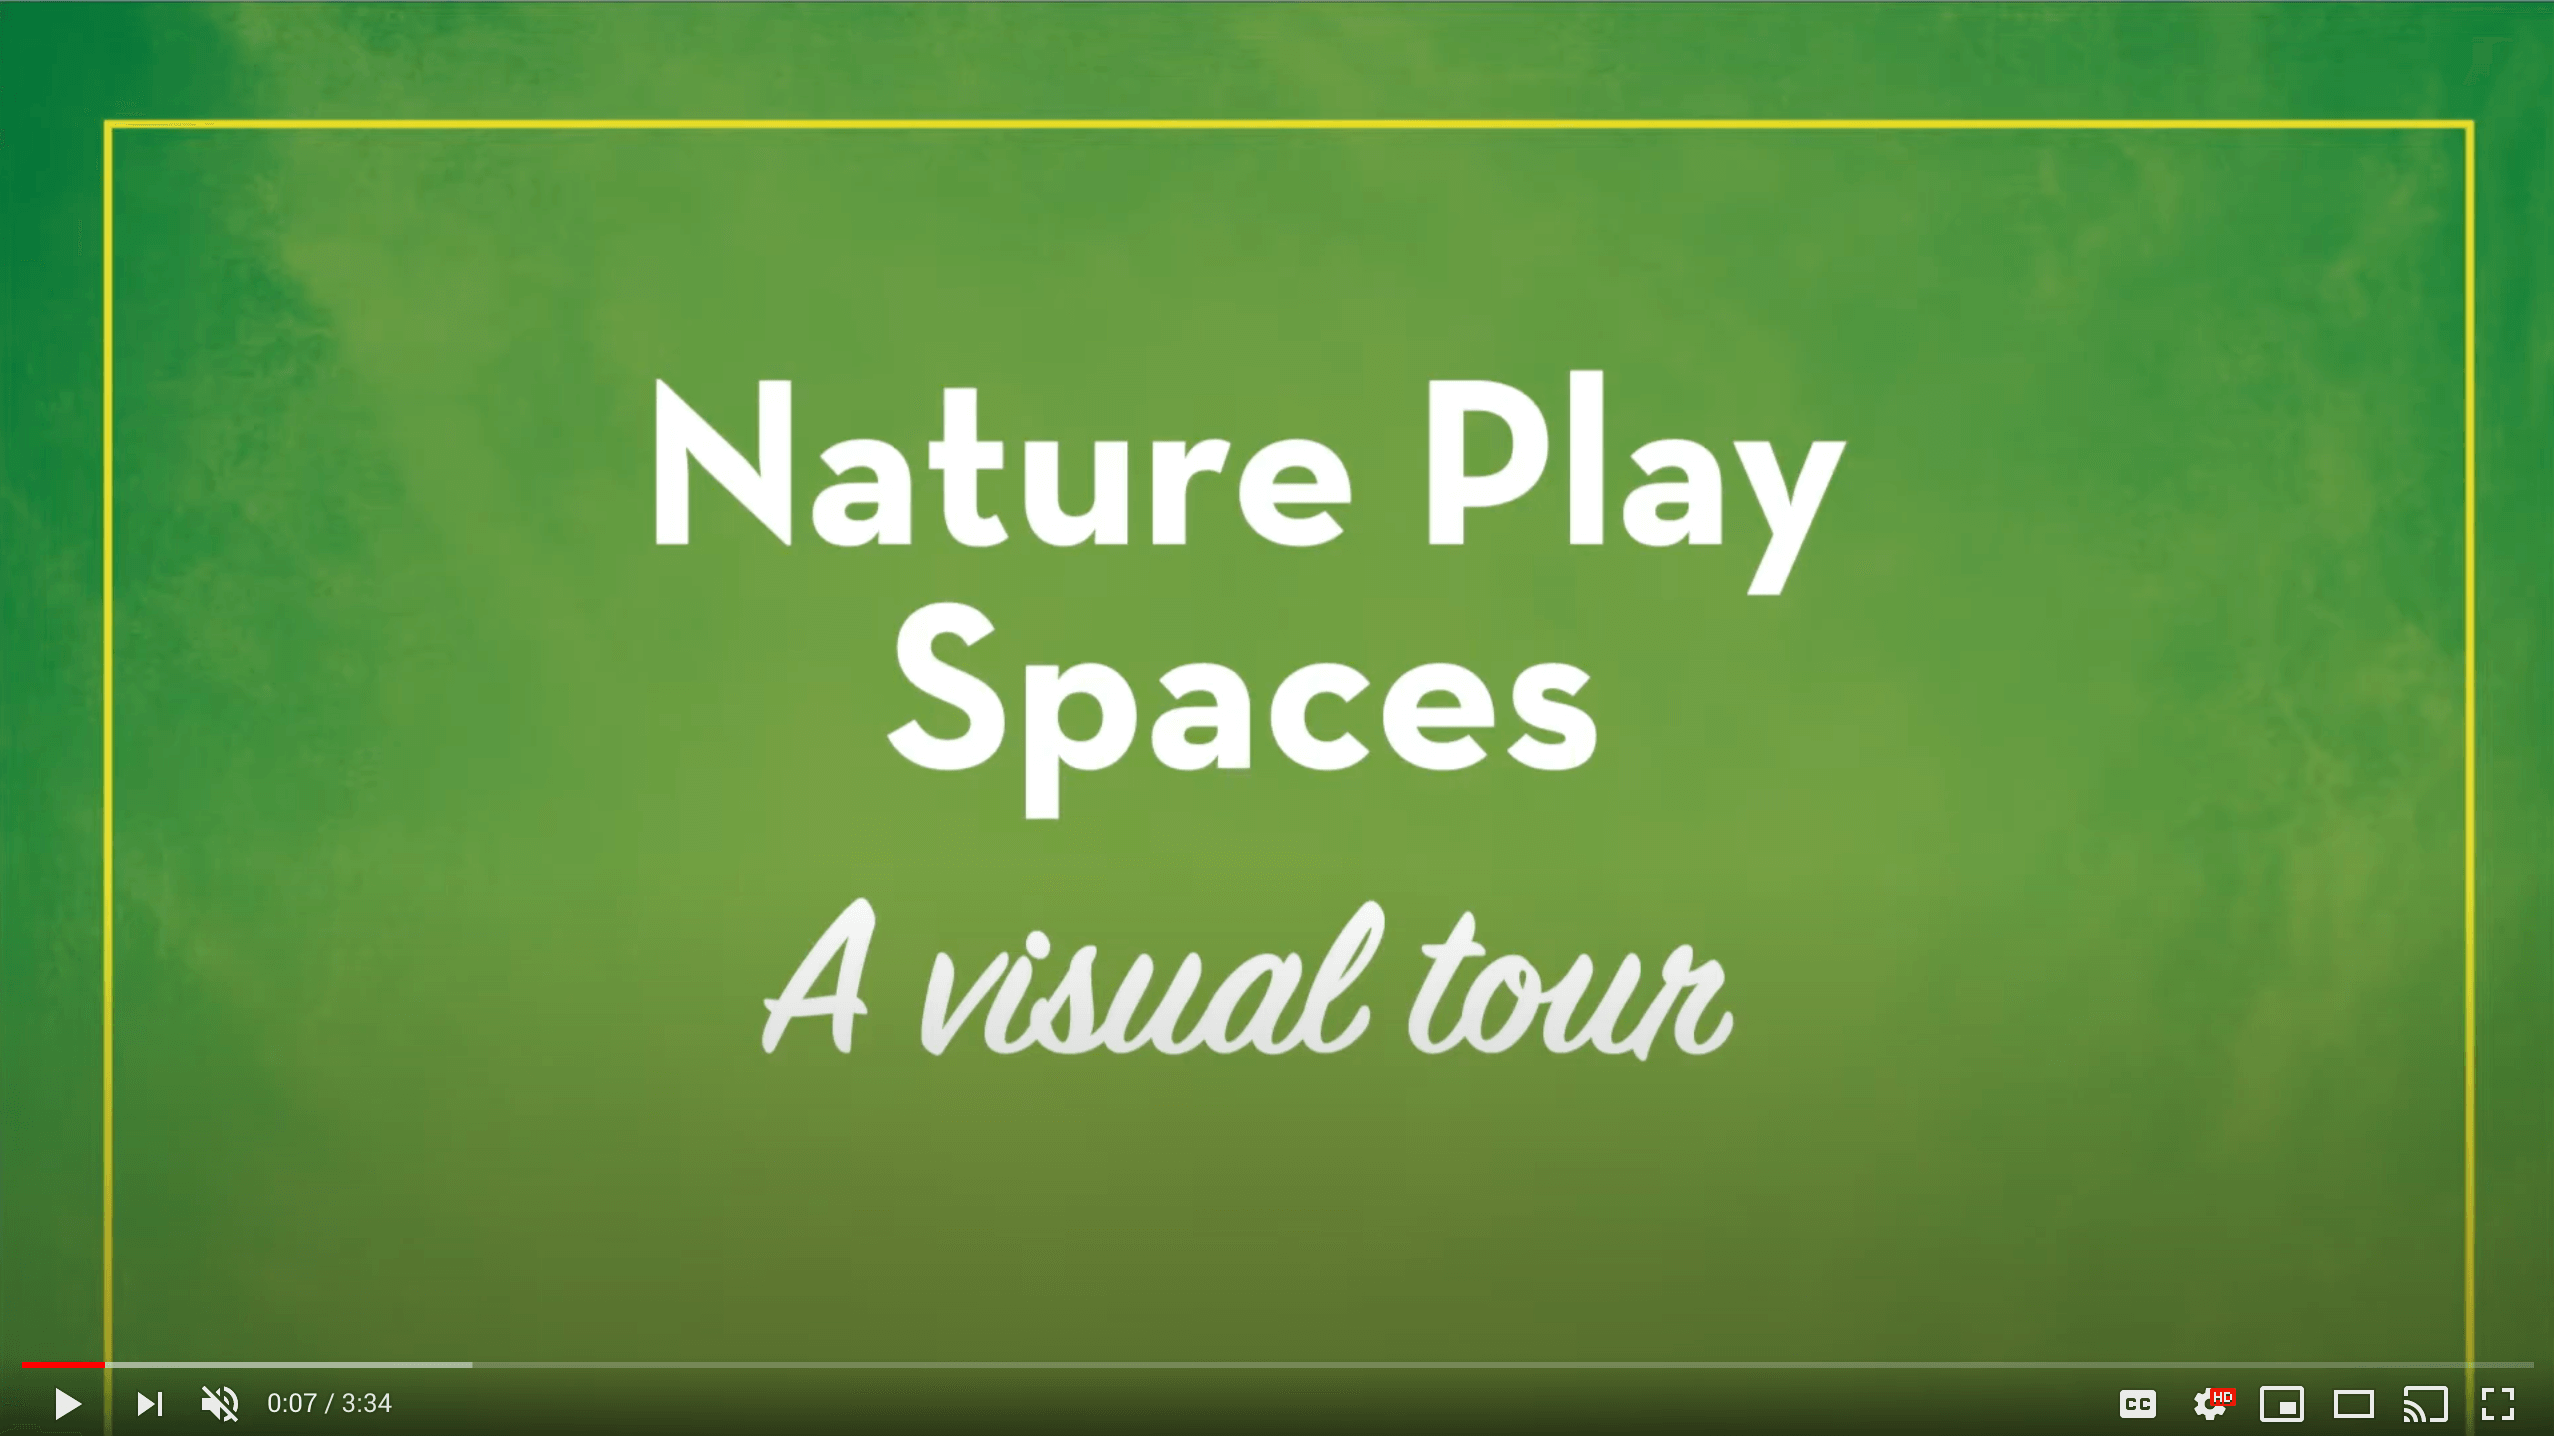 Nature Play Spaces: A Visual Tour